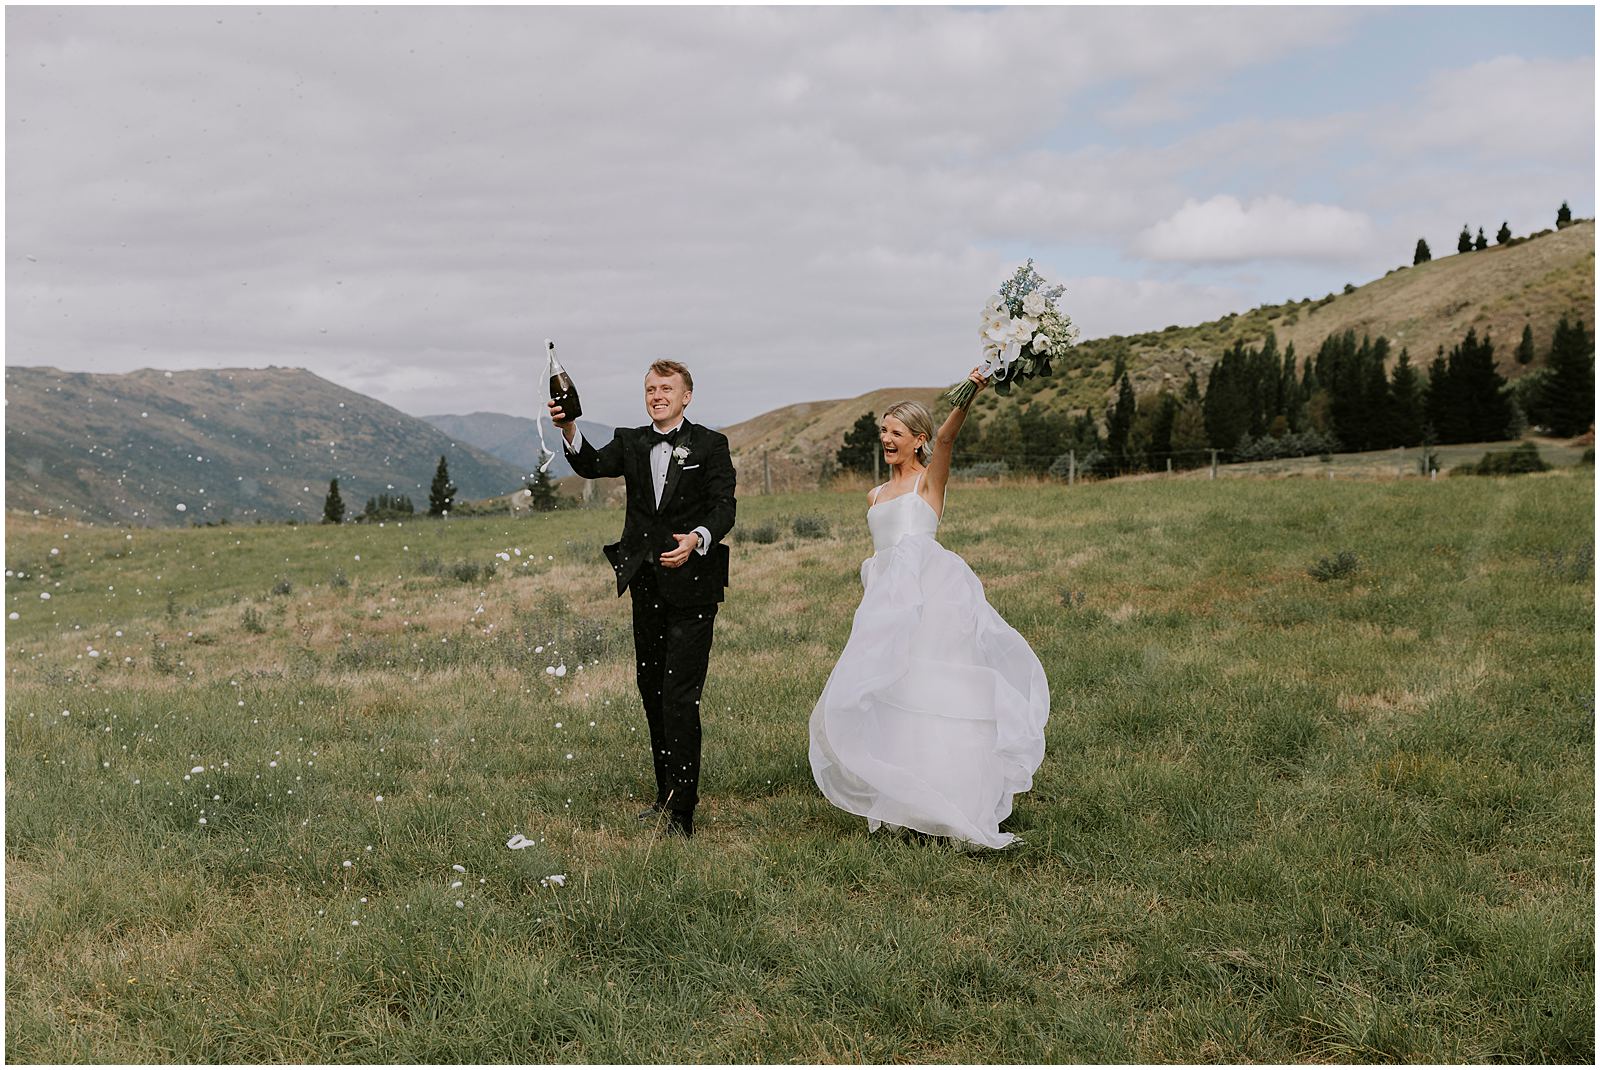 Charlotte Kiri Photography - Wedding Photography of a bride and groom walking in a field with a bottle of champagne spilling over as they raise their hands with joy, with a beautiful backdrop of mountains in Wanaka, New Zealand.